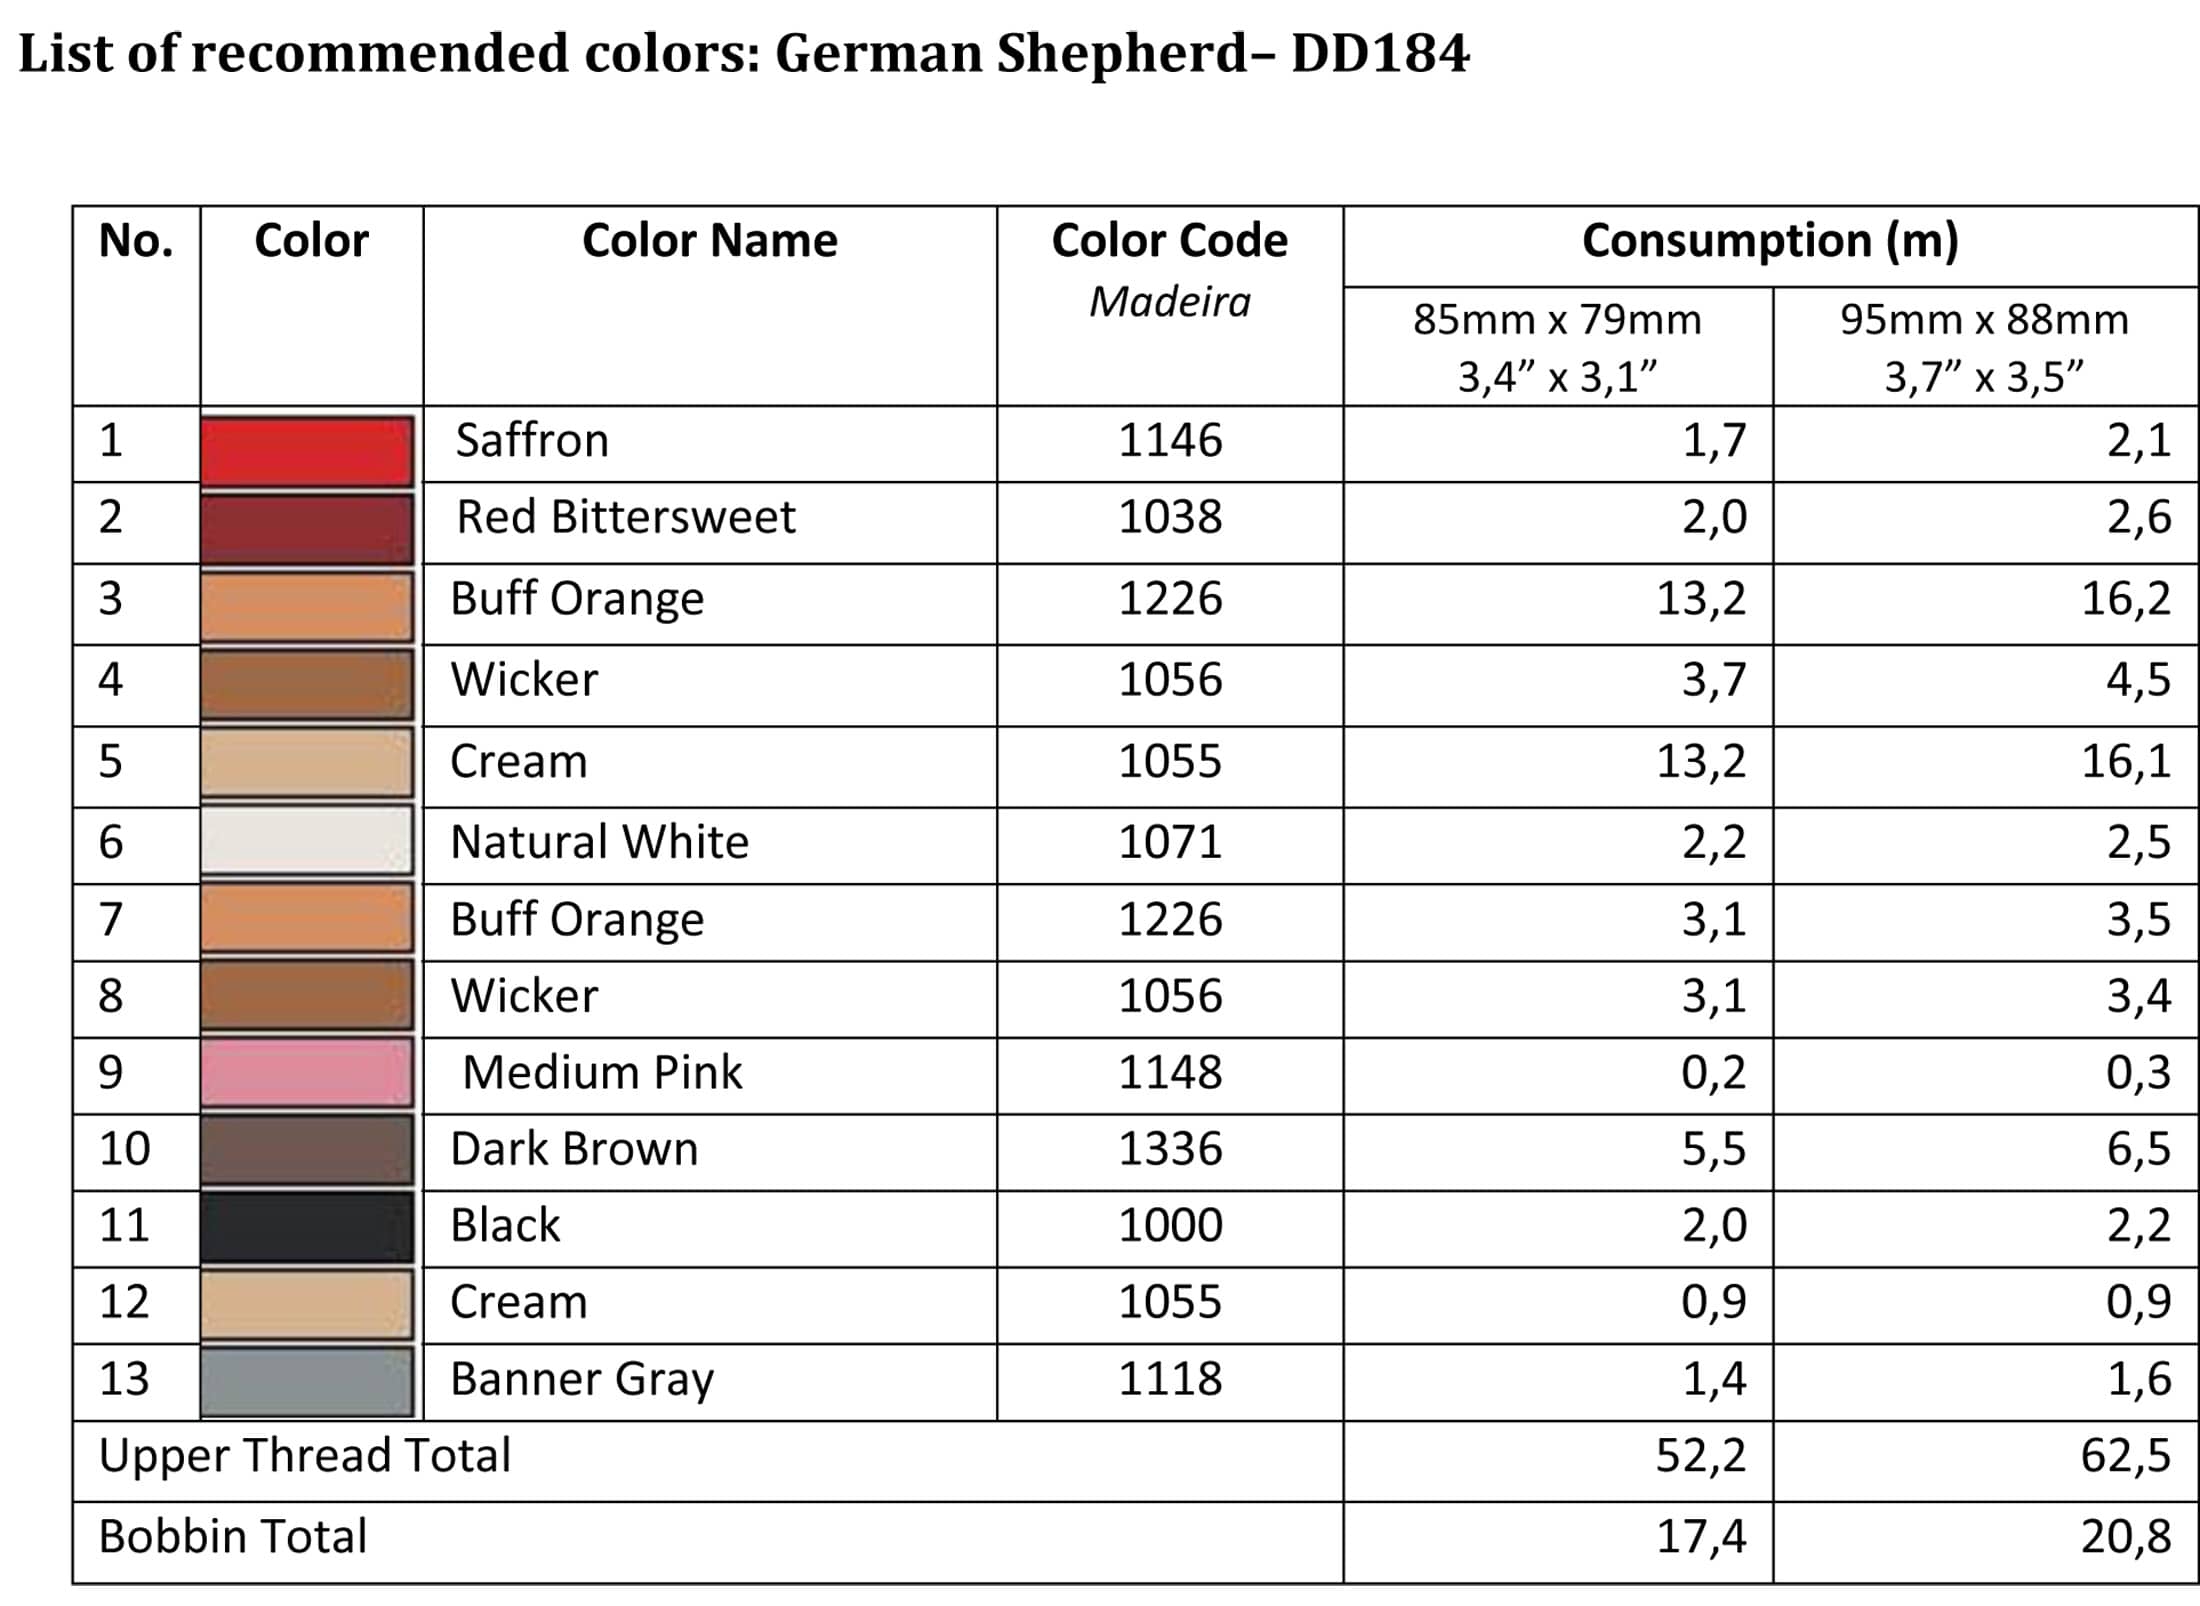 List of recommended colors - DD184